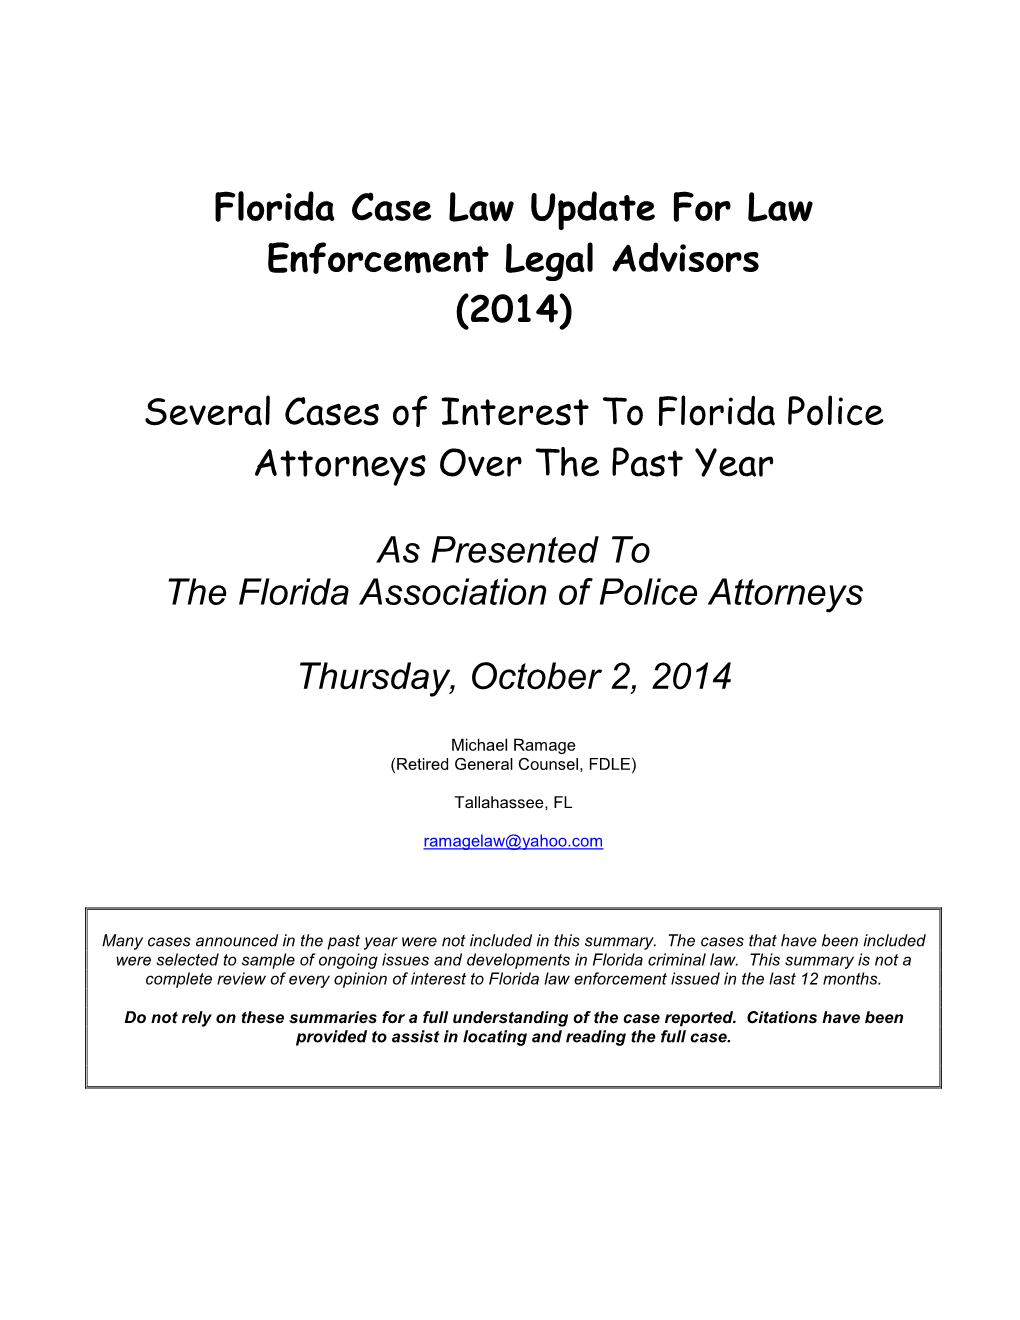 (2014) Several Cases of Interest to Florida Police Attorneys Over